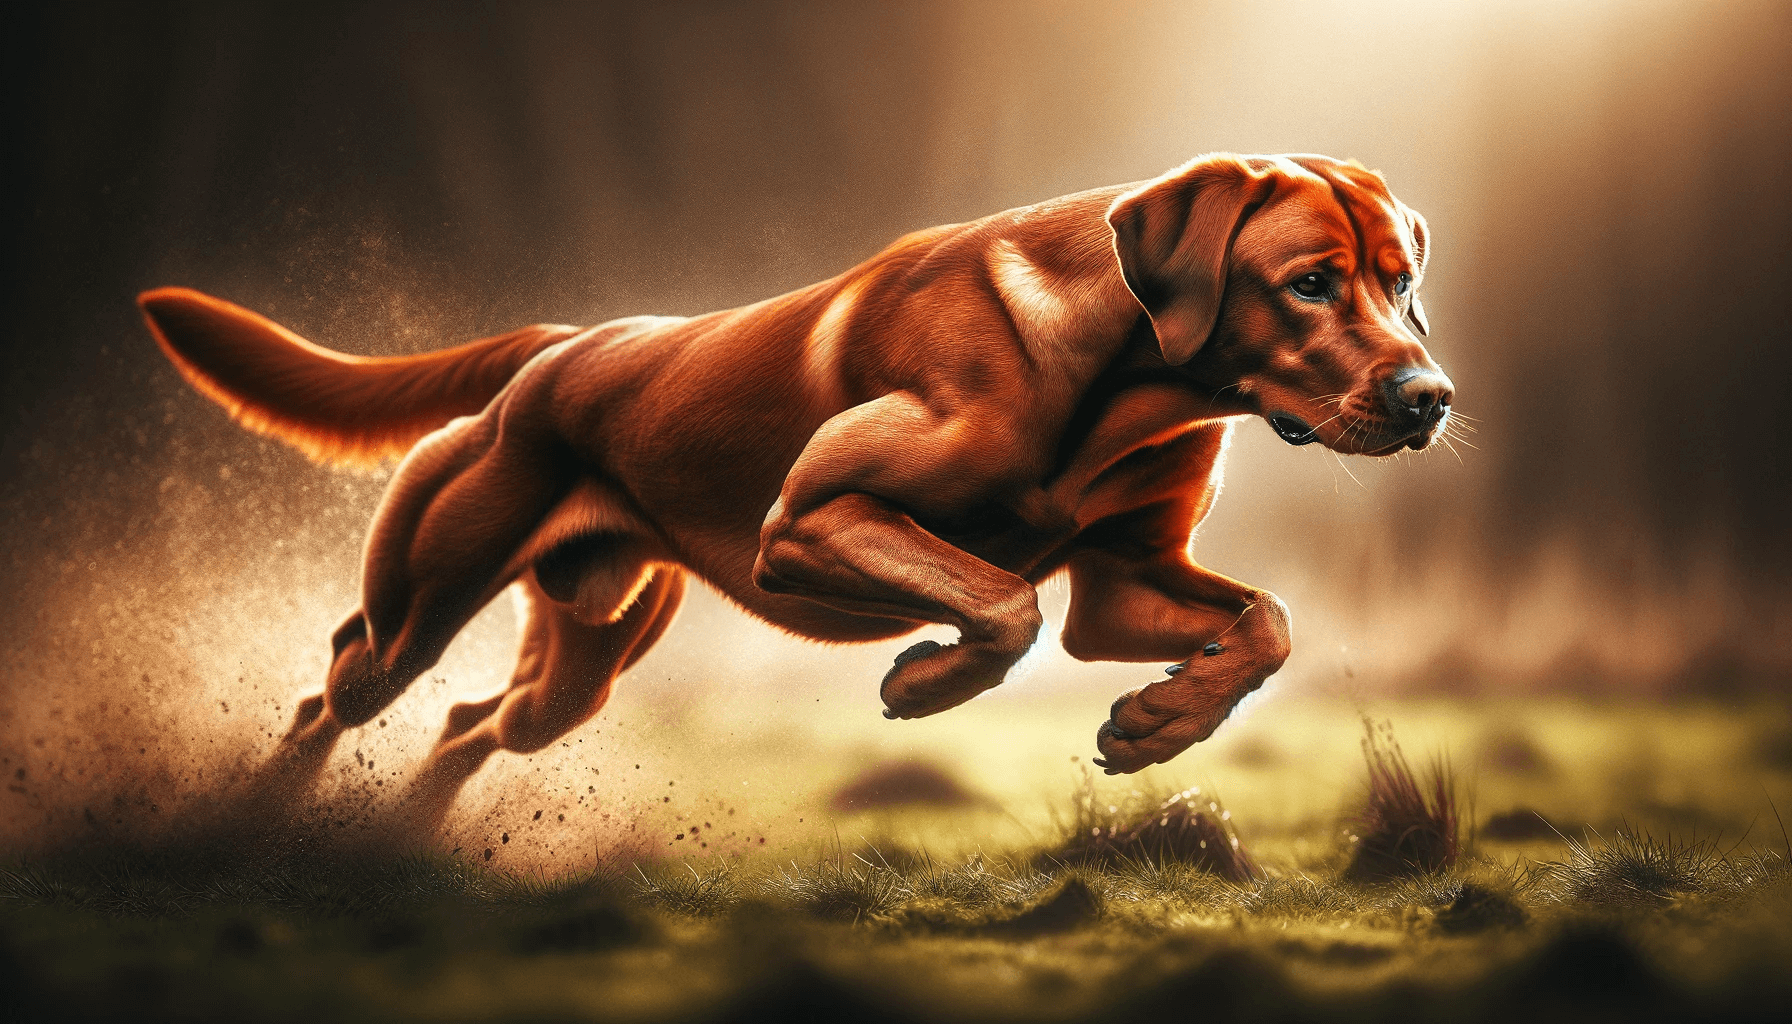 A Red Fox Labrador with a strong prey drive shown in an action-packed scene, highlighting its agility and sportsmanship.